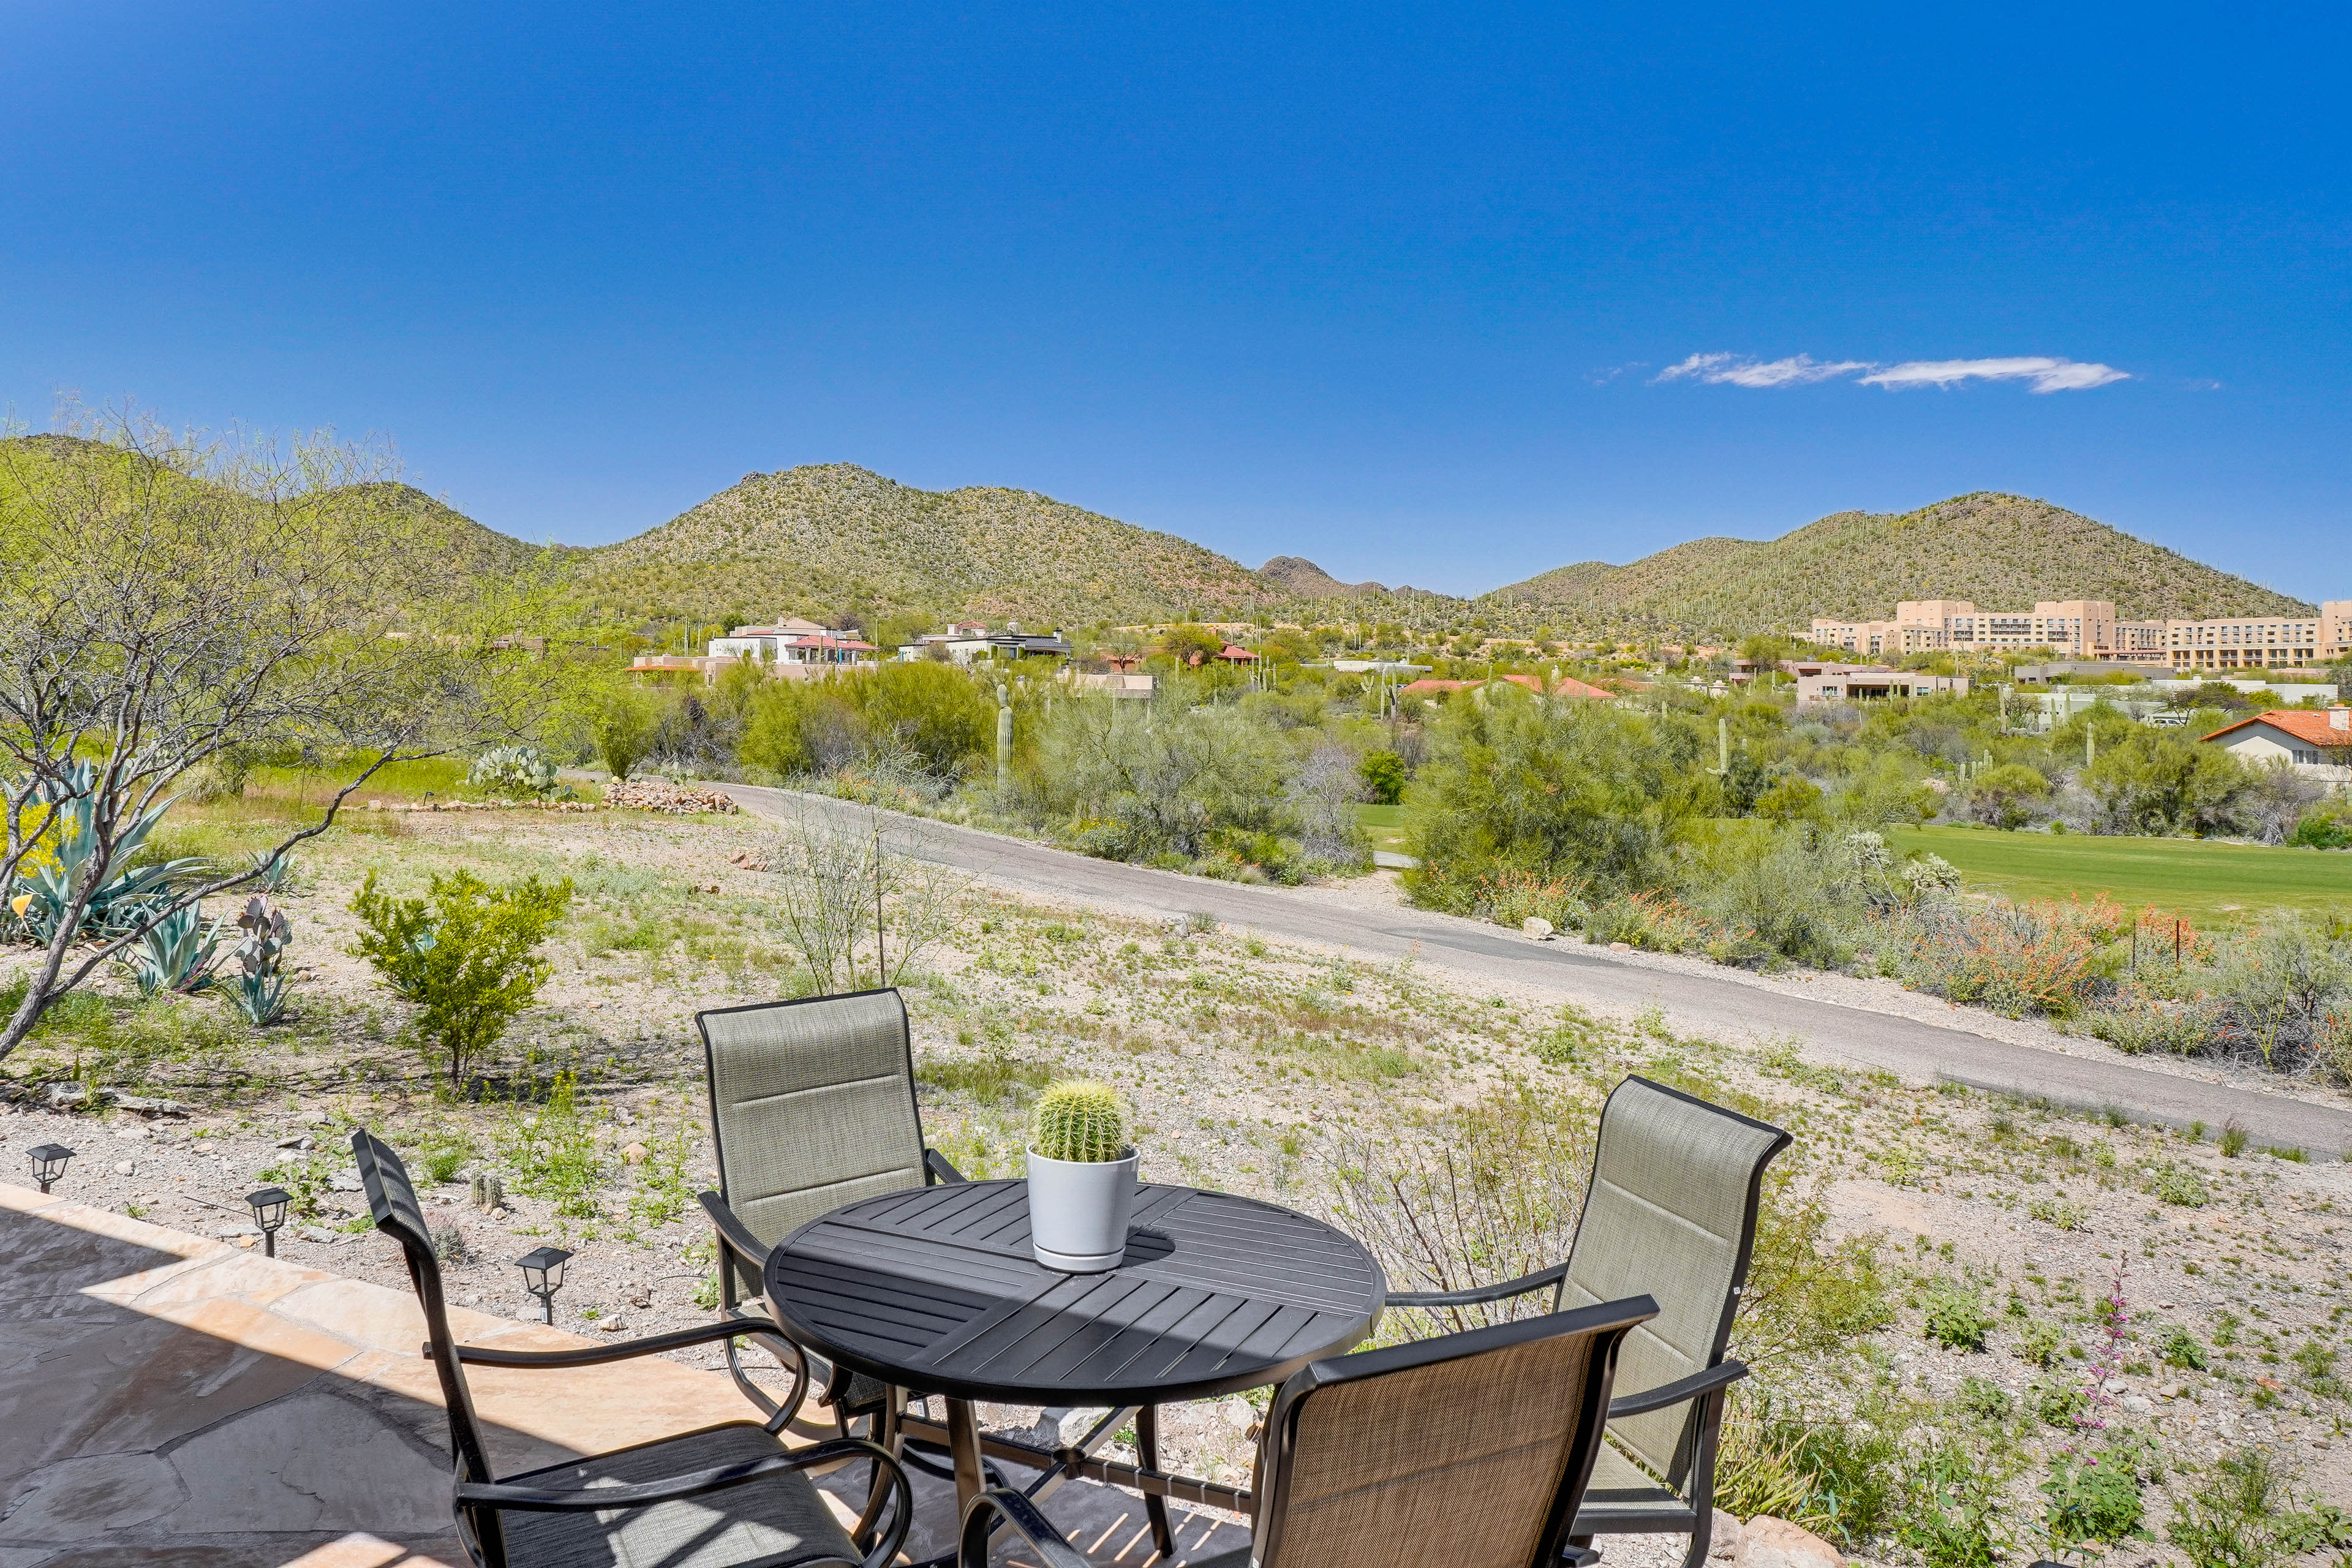 Tucson Vacation Rental | 1BR | 1BA | 1,283 Sq Ft | 2 Steps Required to Enter